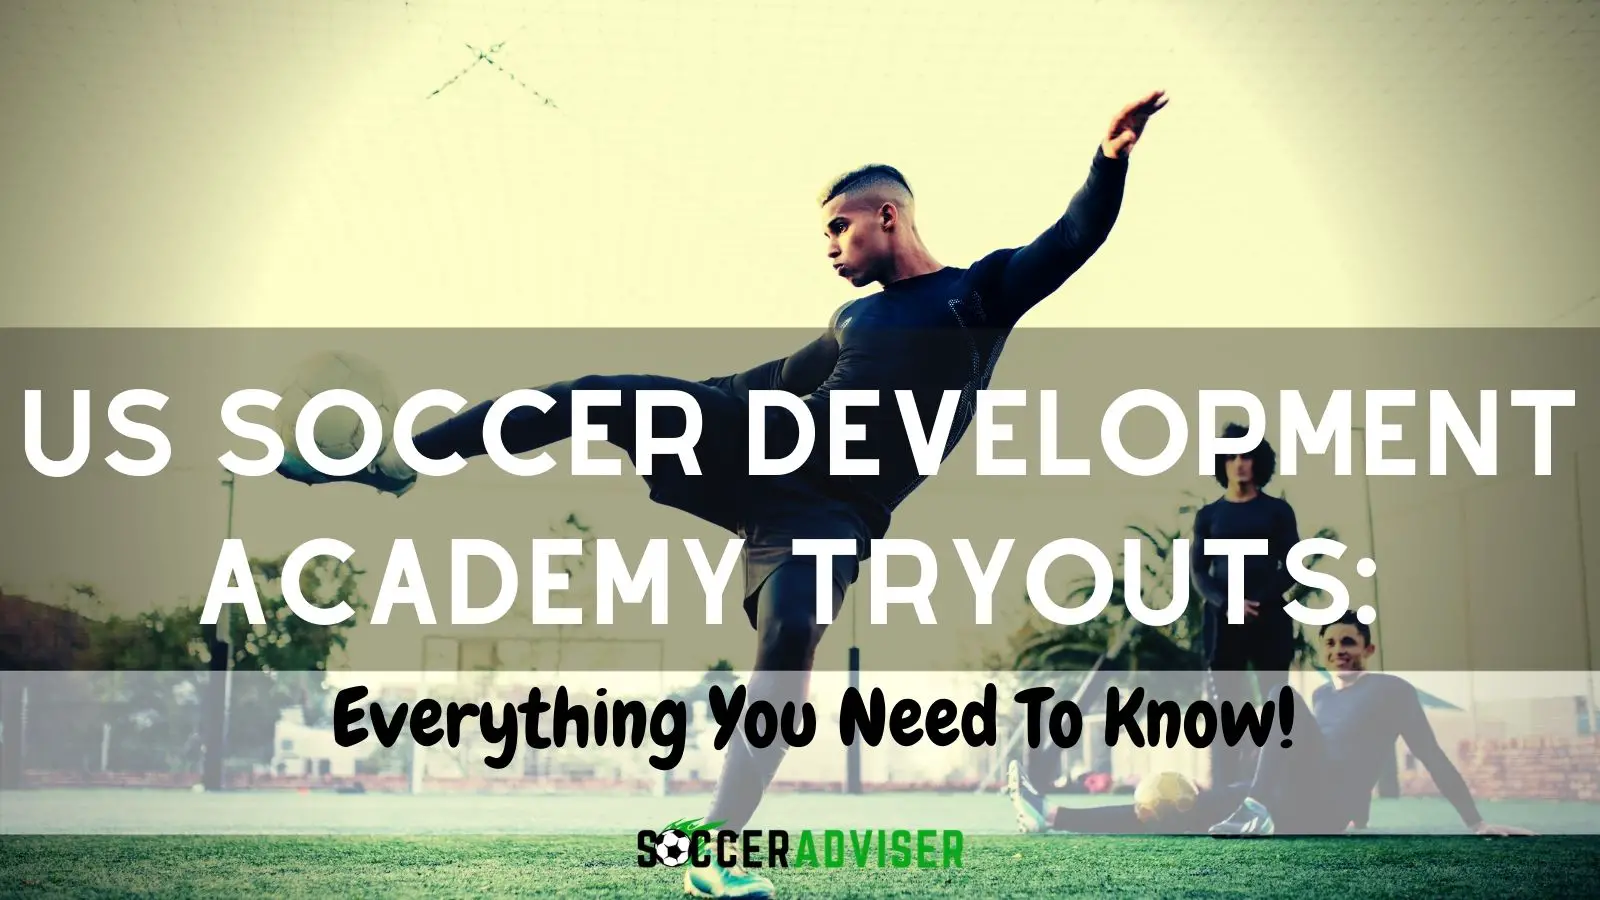 US Soccer Development Academy Tryouts: Everything You Need To Know